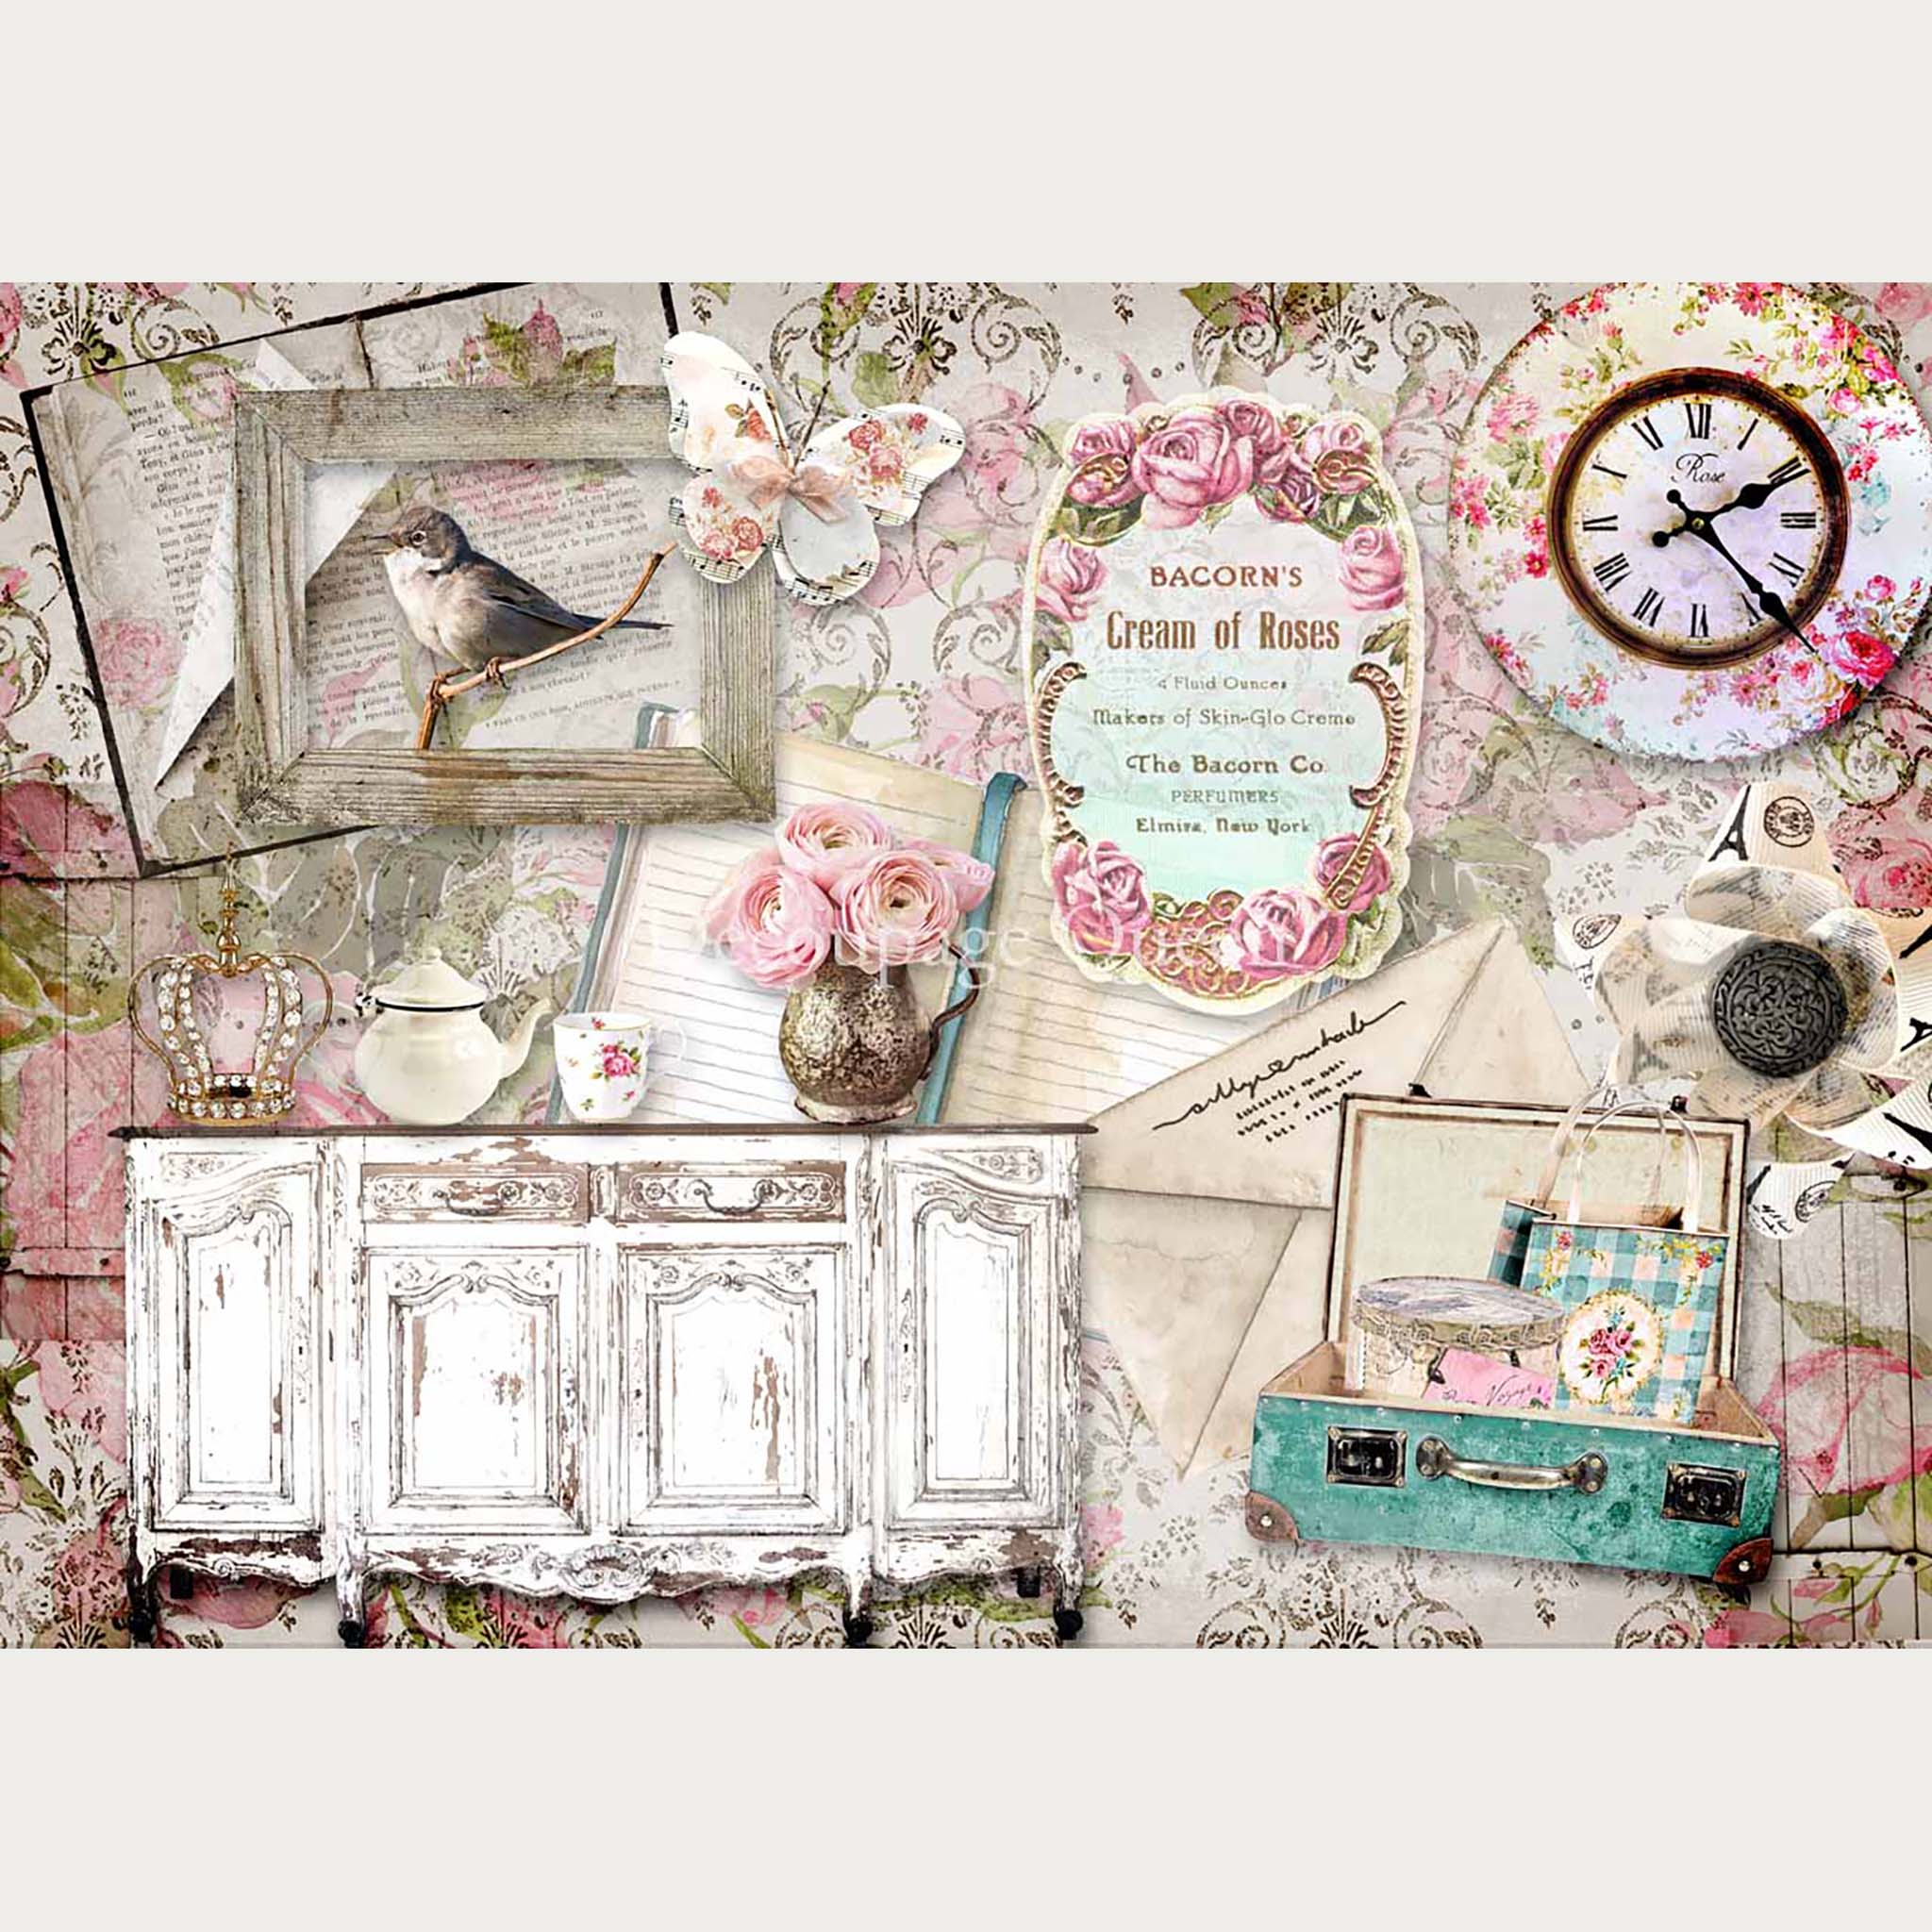 A3 rice paper that features a collage of a vintage buffet table, clock, suitcase, letters, notebooks, and a bird in a wood frame are against a light floral background. White borders are on the top and bottom.